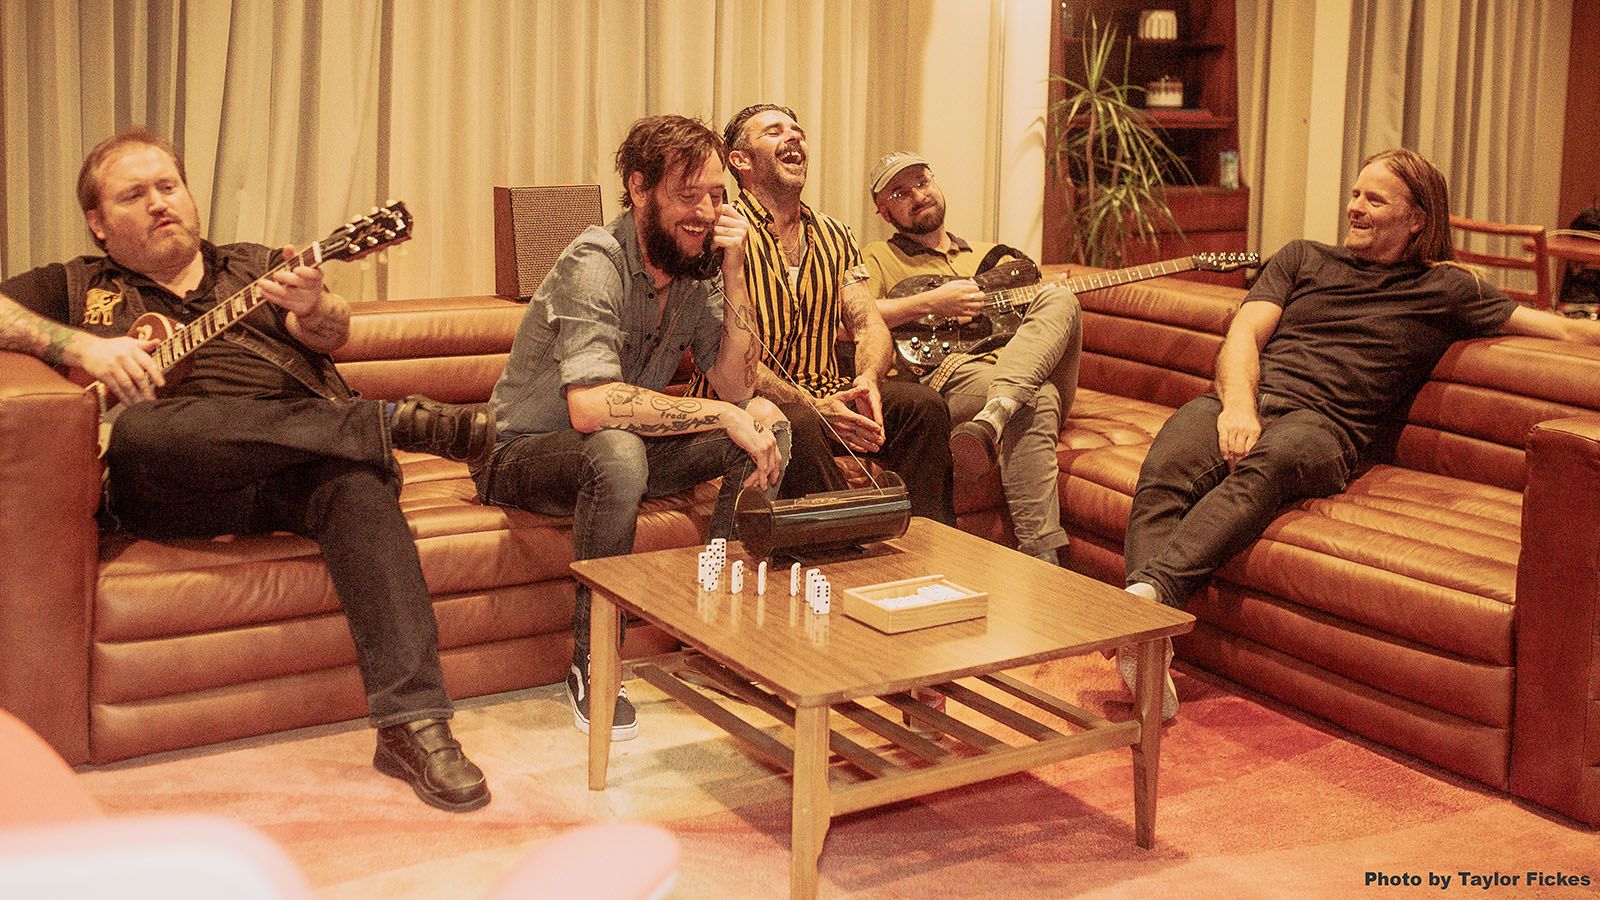 Band of Horses will be at The Clyde Theatre on Wednesday, July 10, with Carriers.